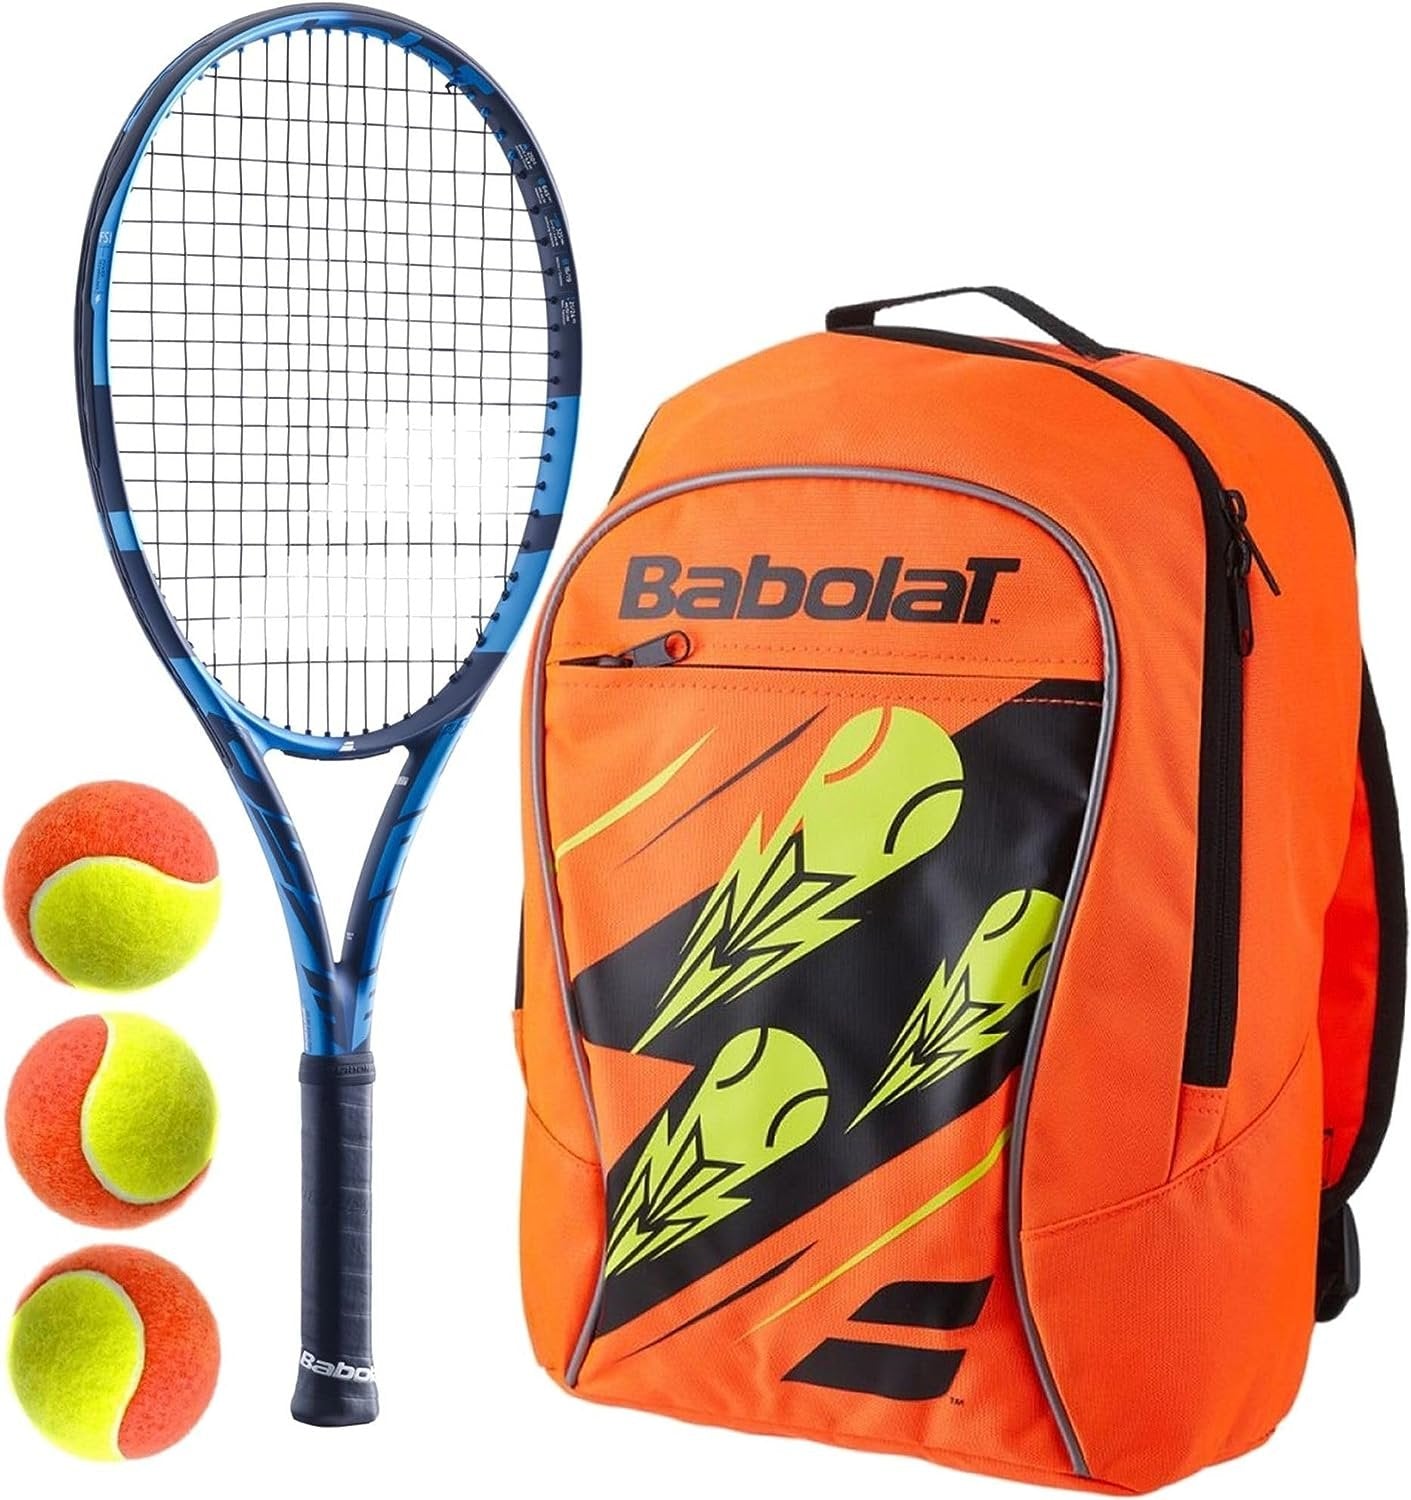 Babolat Pure Drive Junior Tennis Racquet Bundled with a Child's Tennis Backpack and 3 Tennis Training Balls